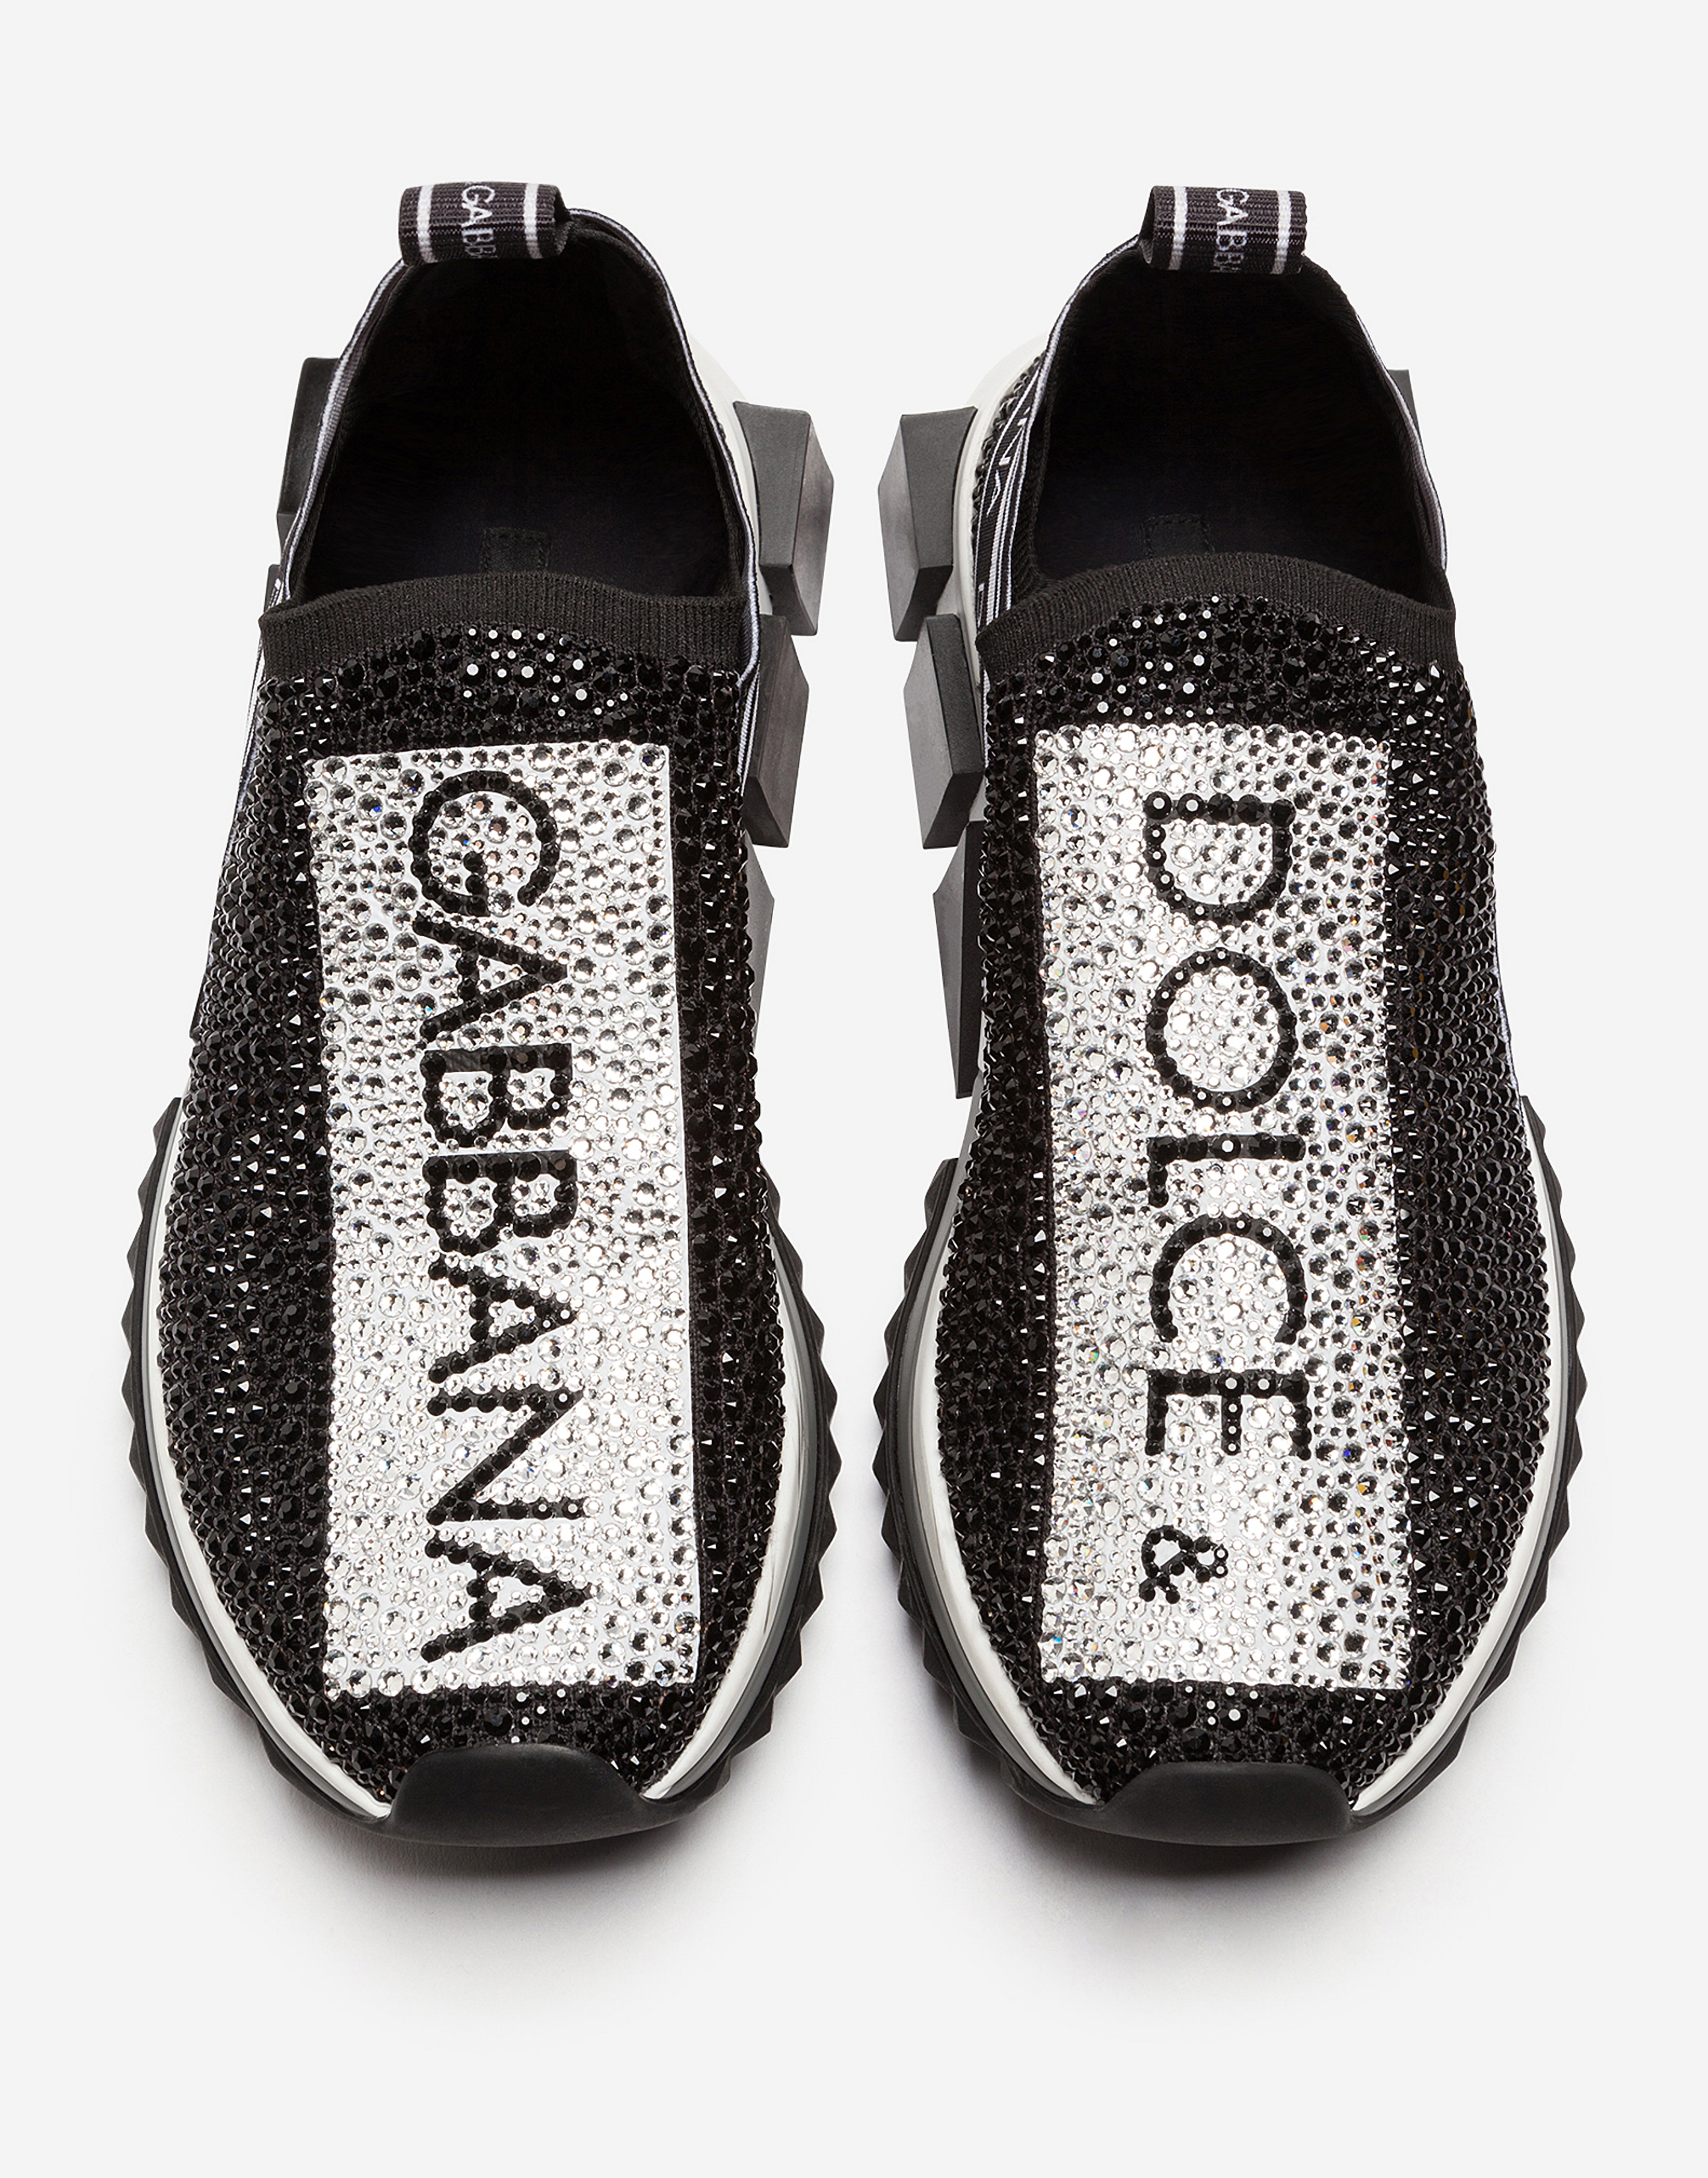 dolce and gabbana tennis shoes